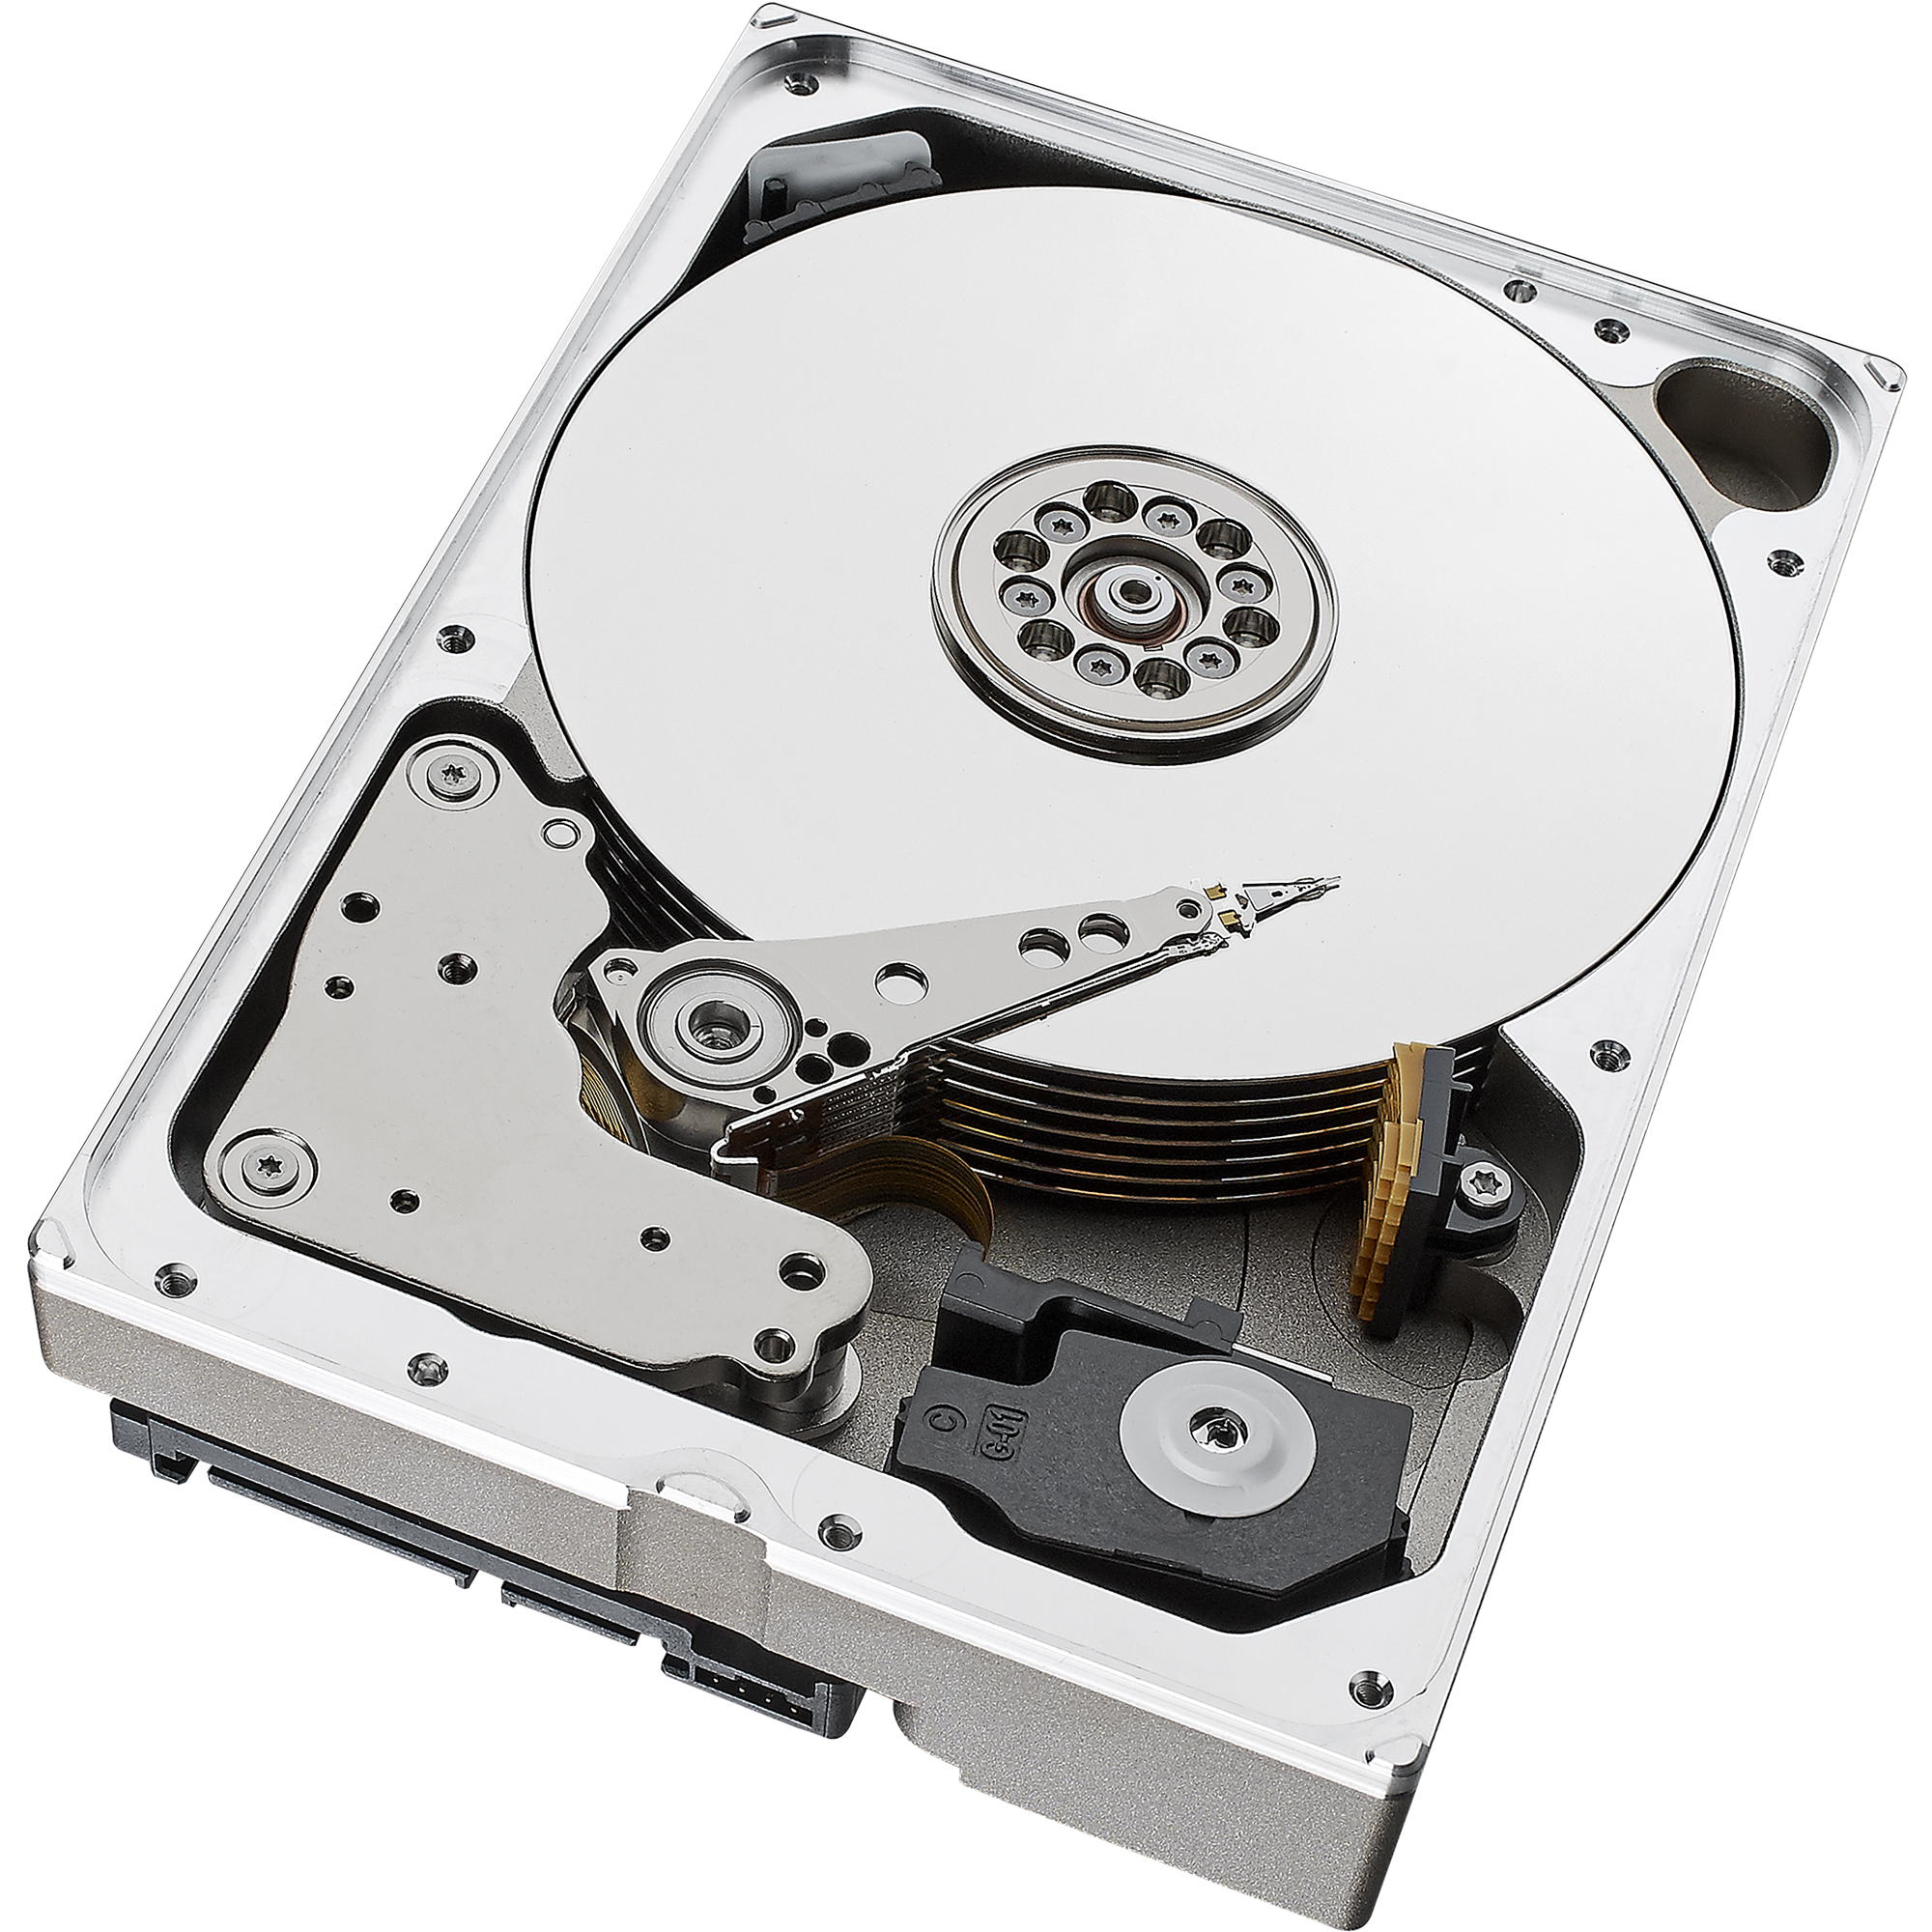 Seagate SkyHawk AI ST10000VE0004 - Hard drive - 10 TB - internal - 3.5" - SATA 6Gb/s - buffer: 256 MB - with Seagate Rescue Data Recovery - image 3 of 5